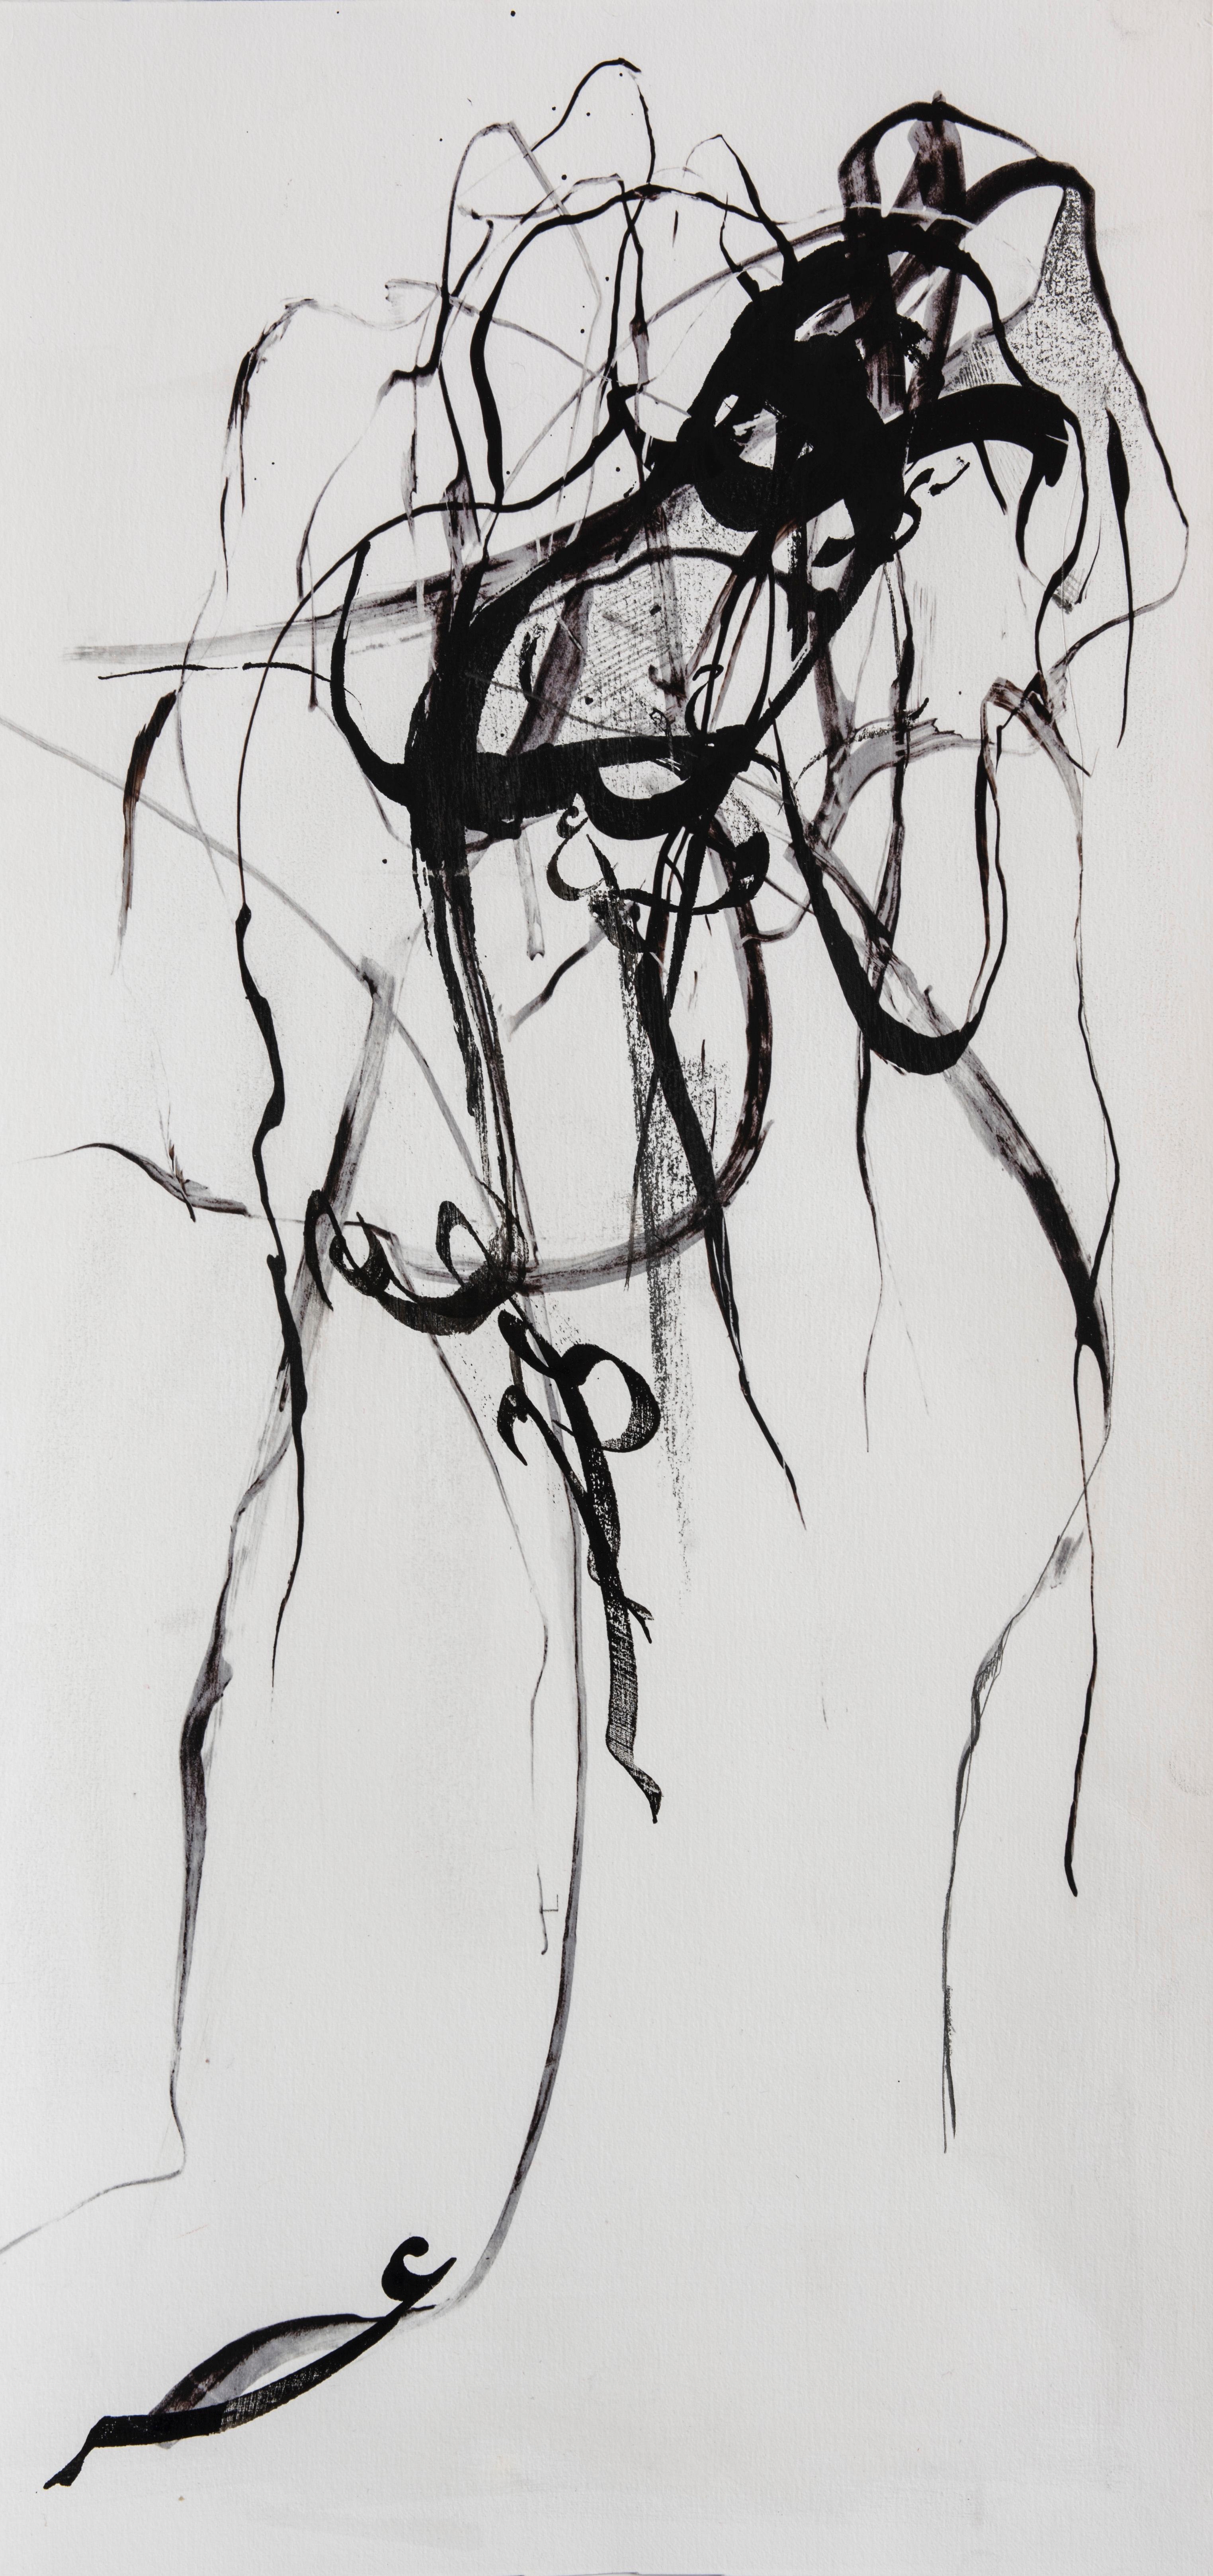 Nazanin Moghbeli Abstract Drawing - Release: black abstract Islamic calligraphy ink drawing / painting on paper